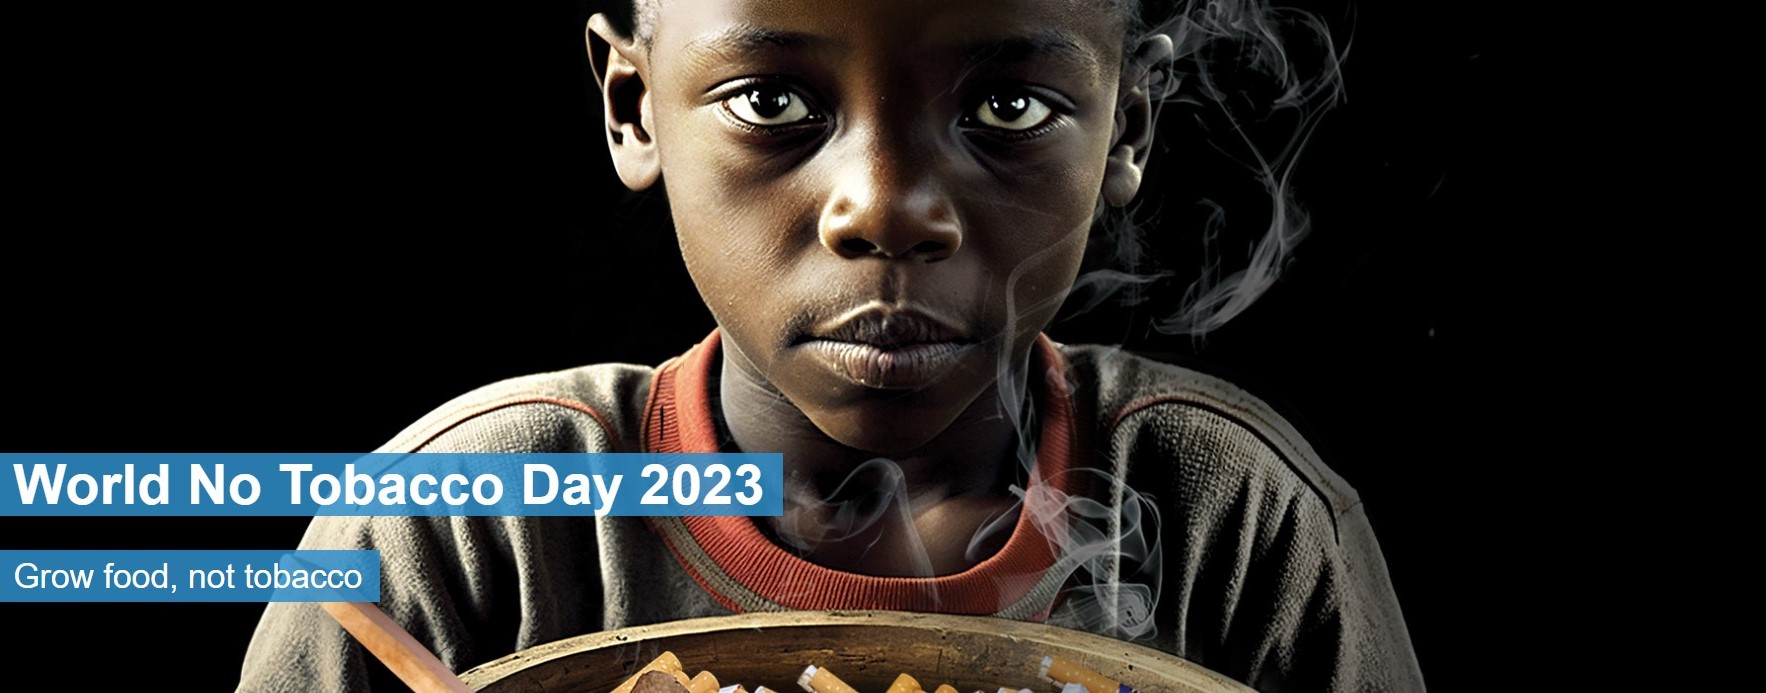 no tabacco day 2023